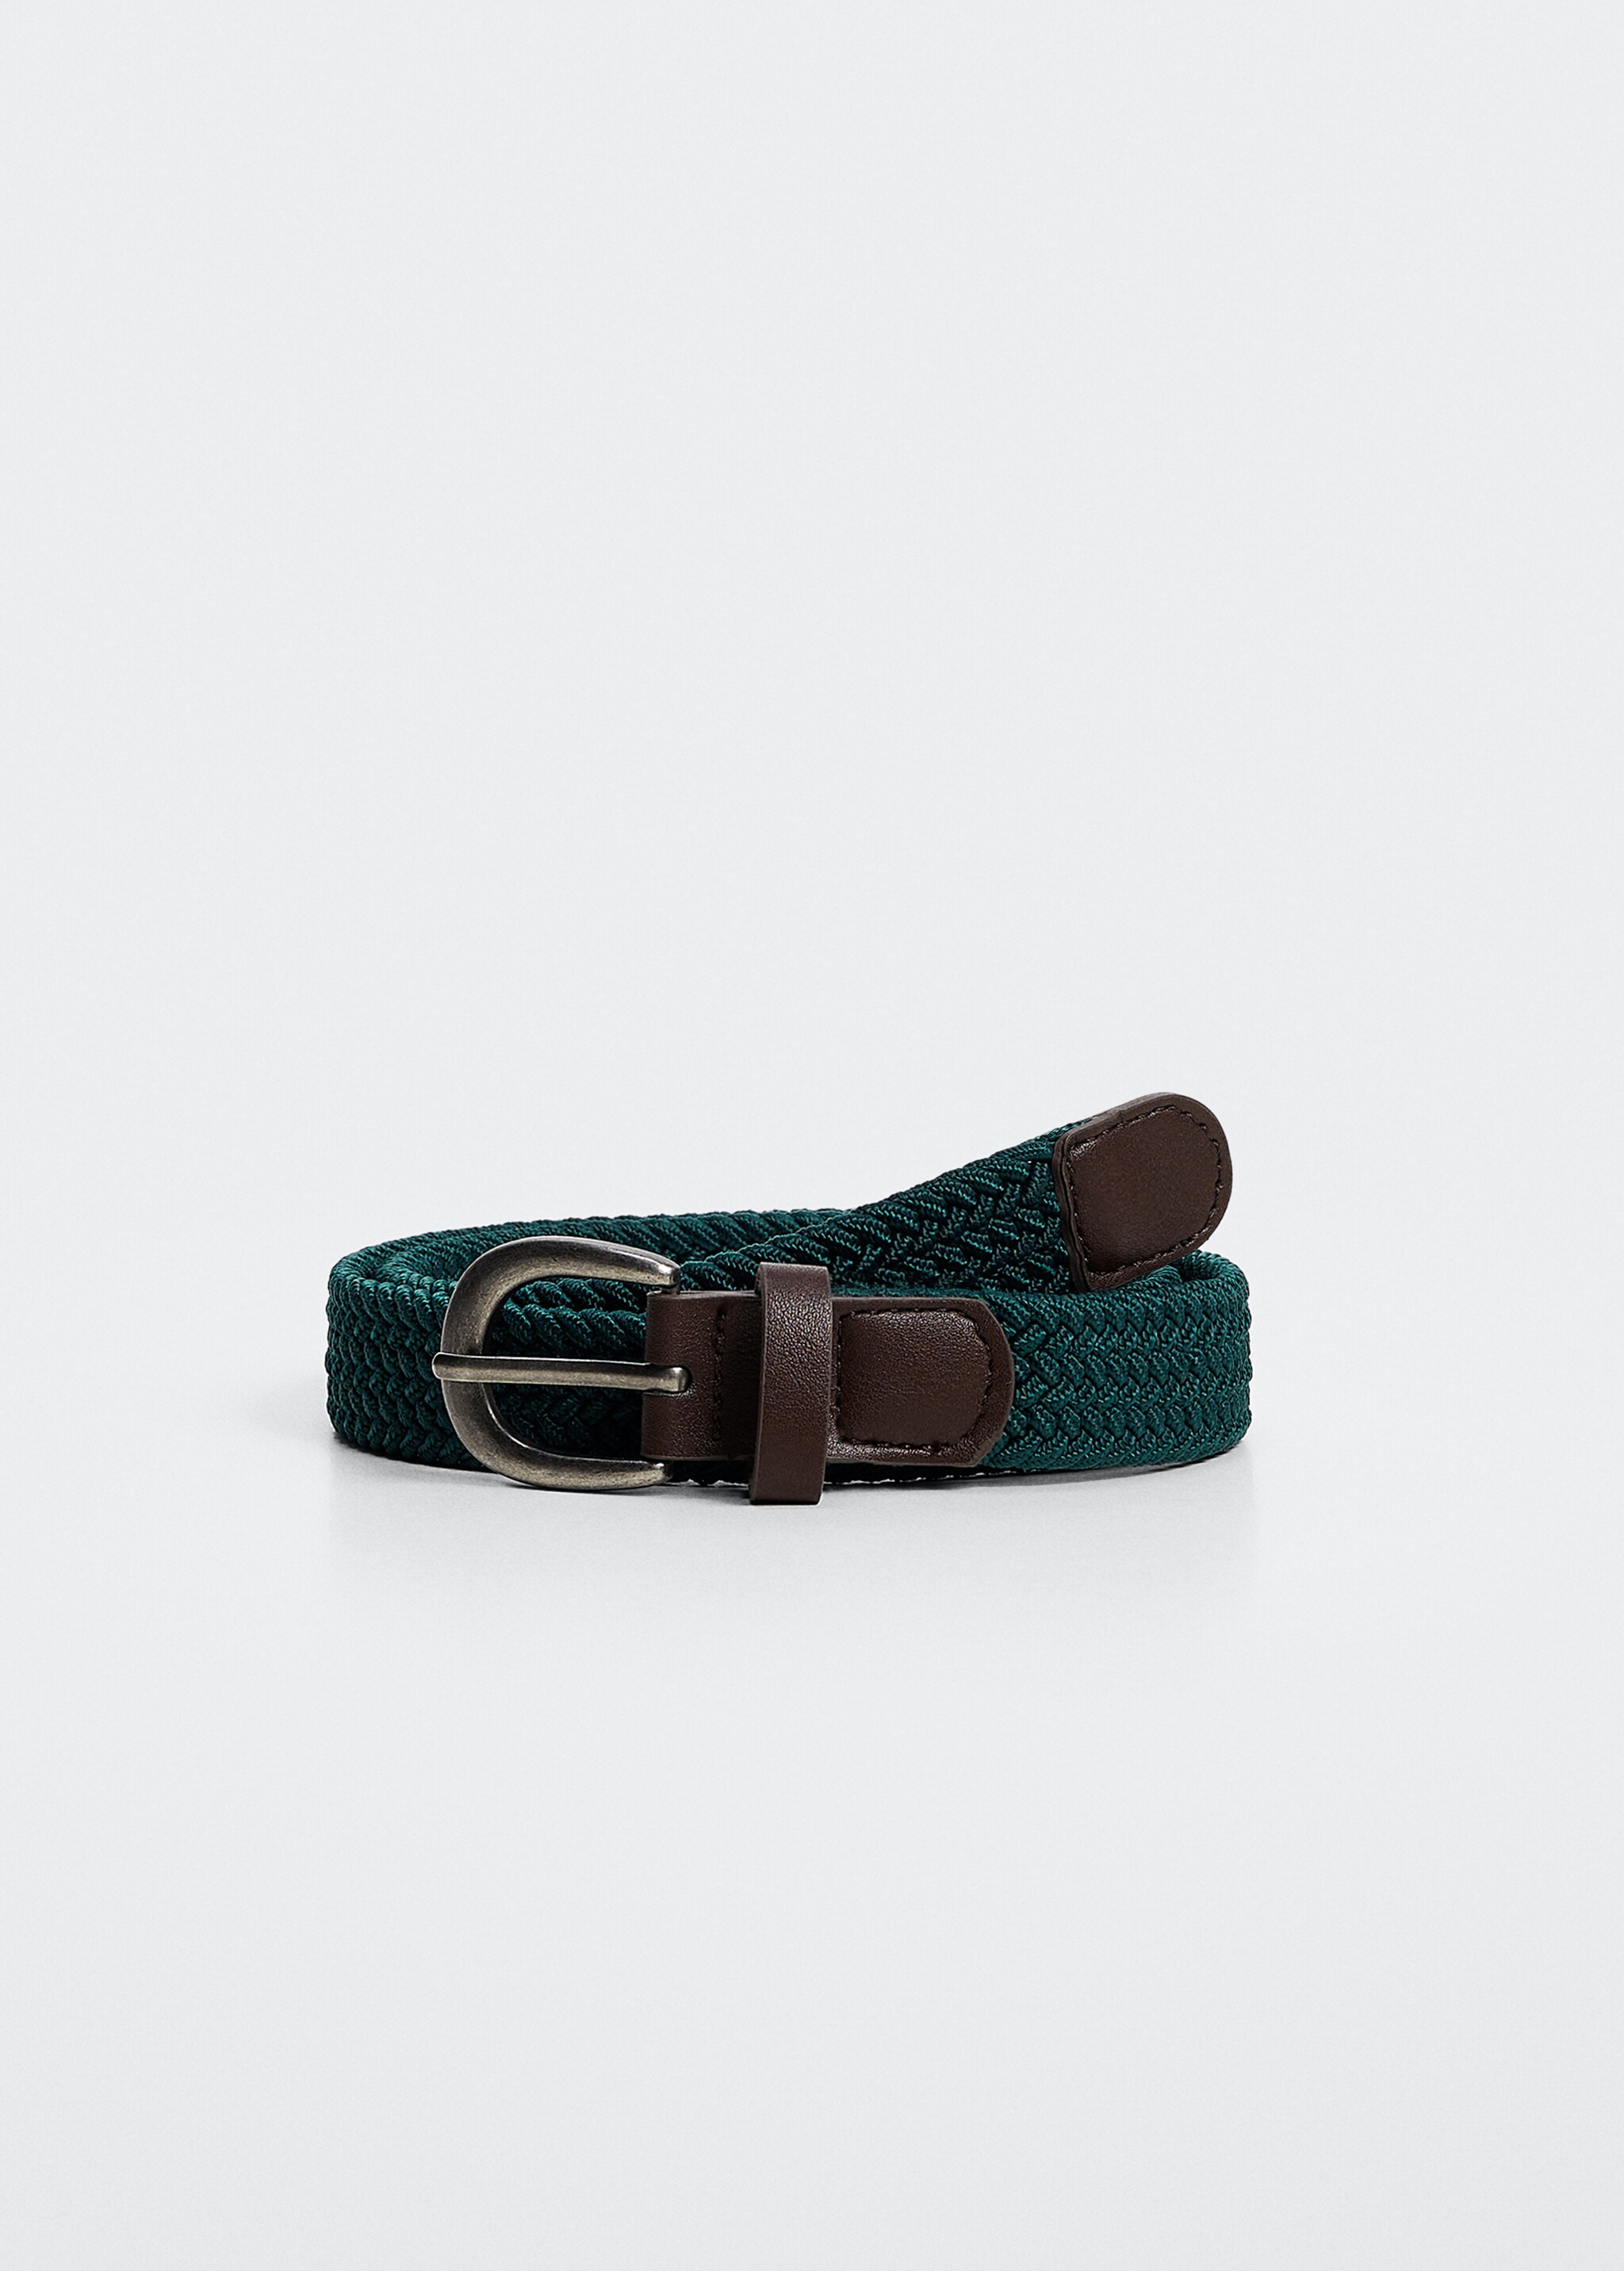 Braided belt - Article without model